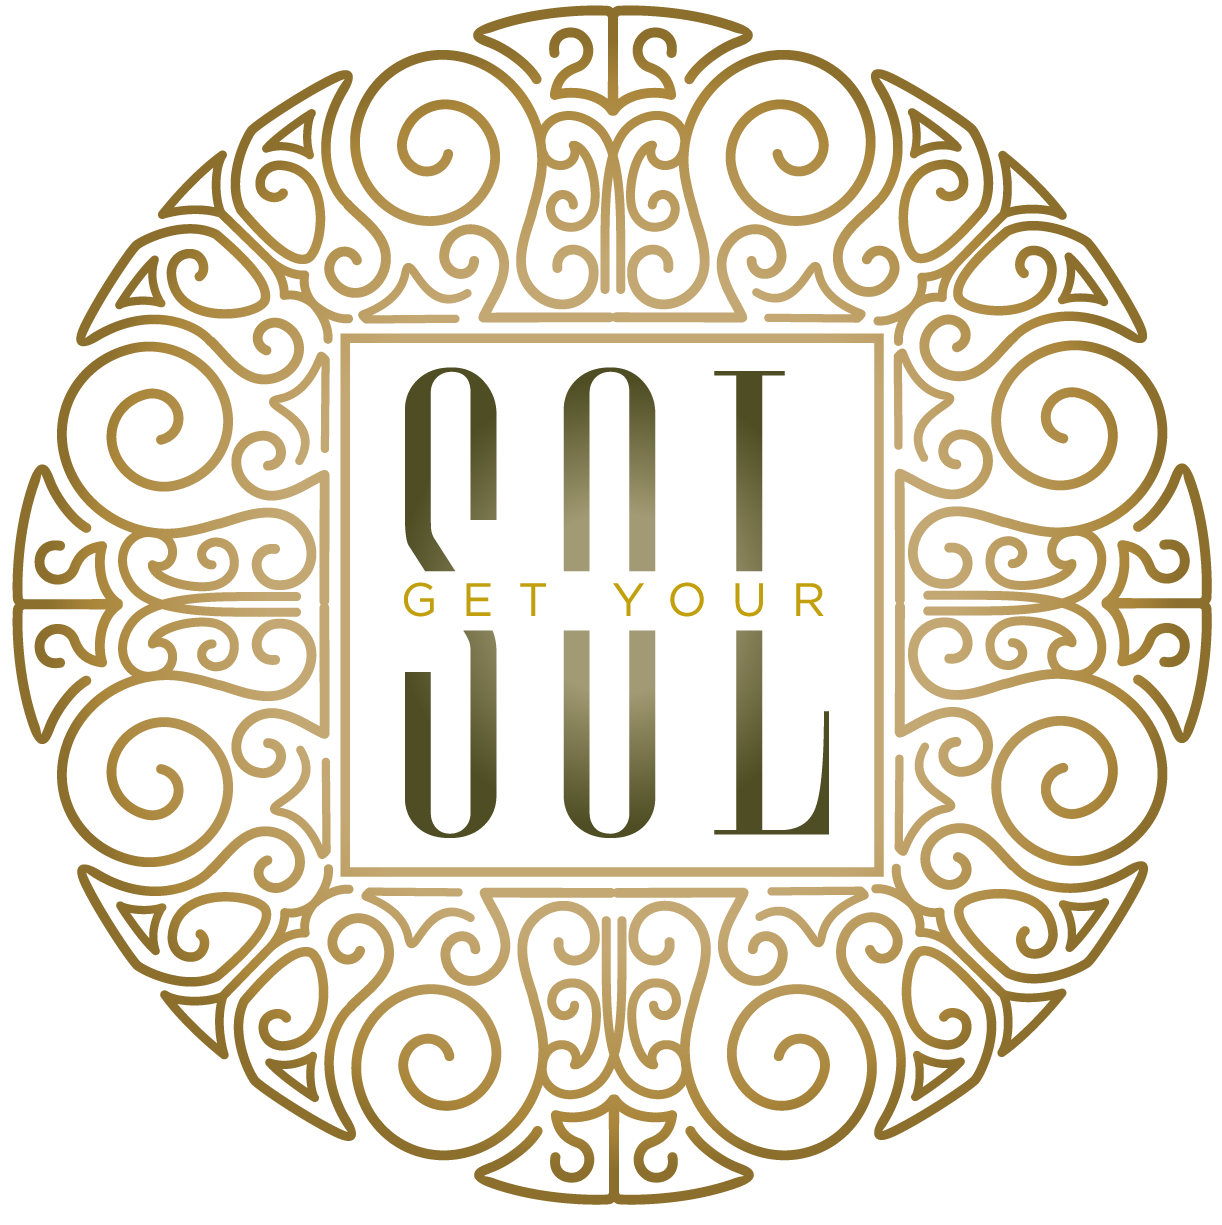 Get Your Sol